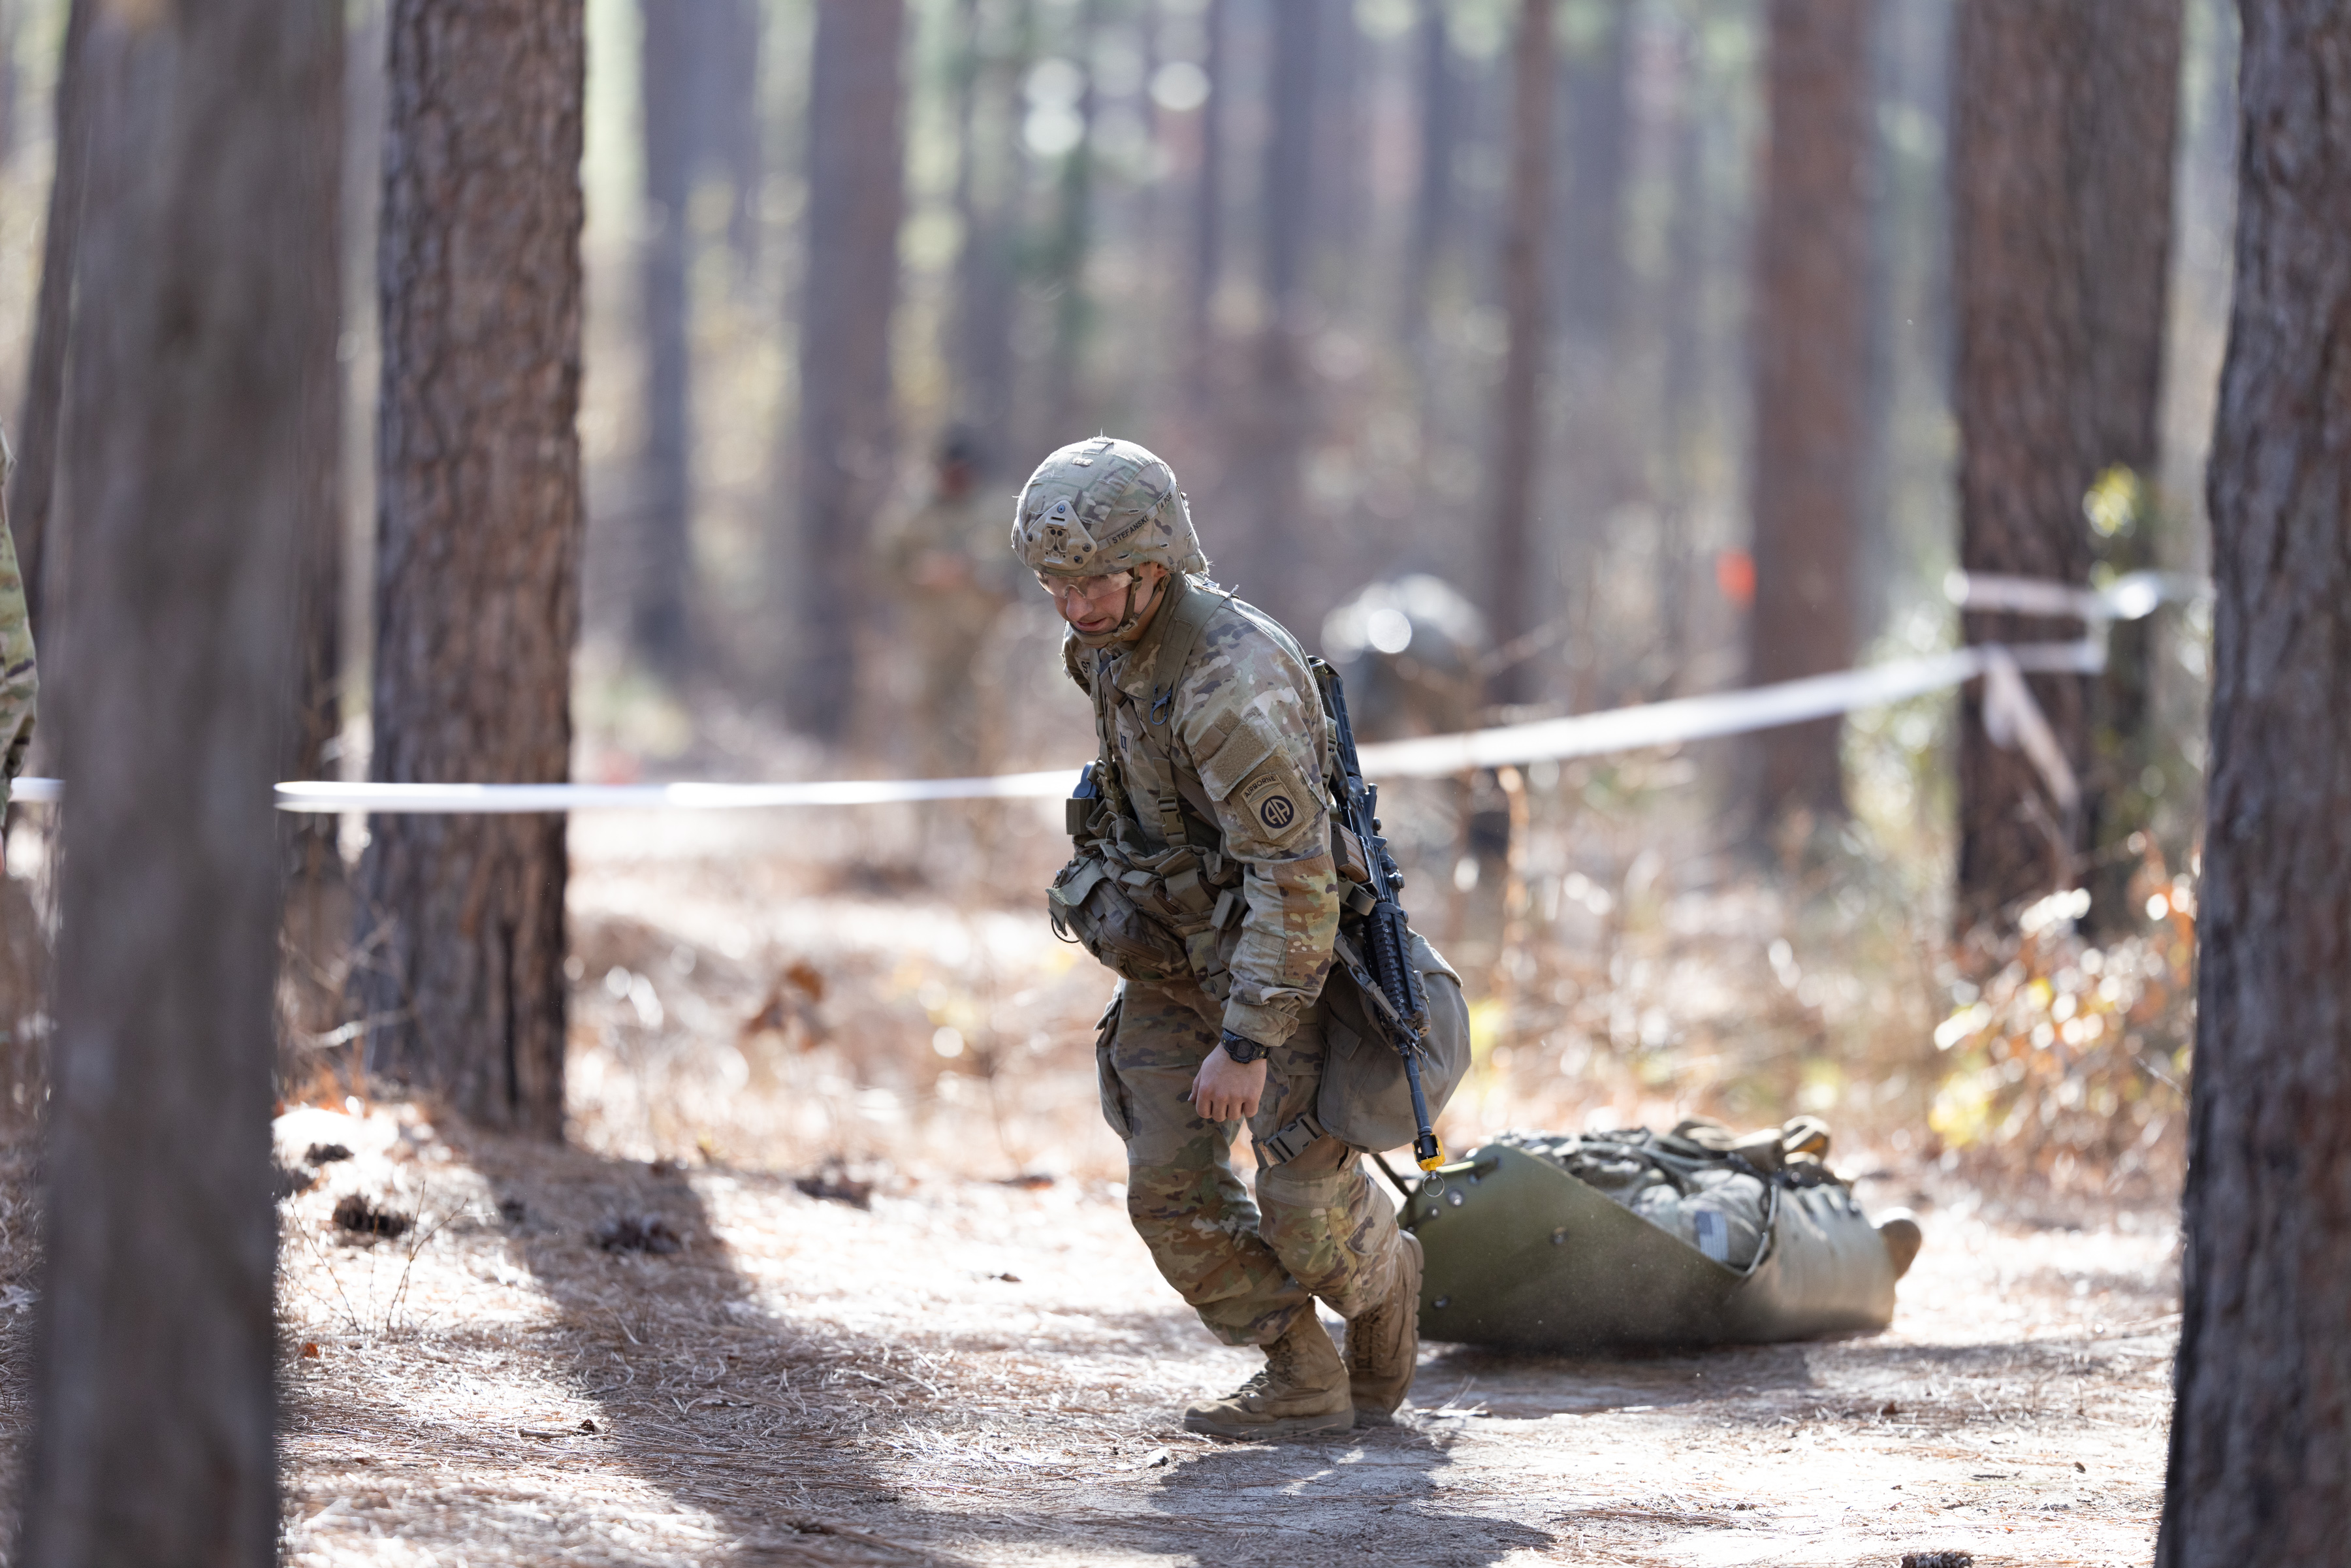 Soldier performing pulling wounded soldier during training